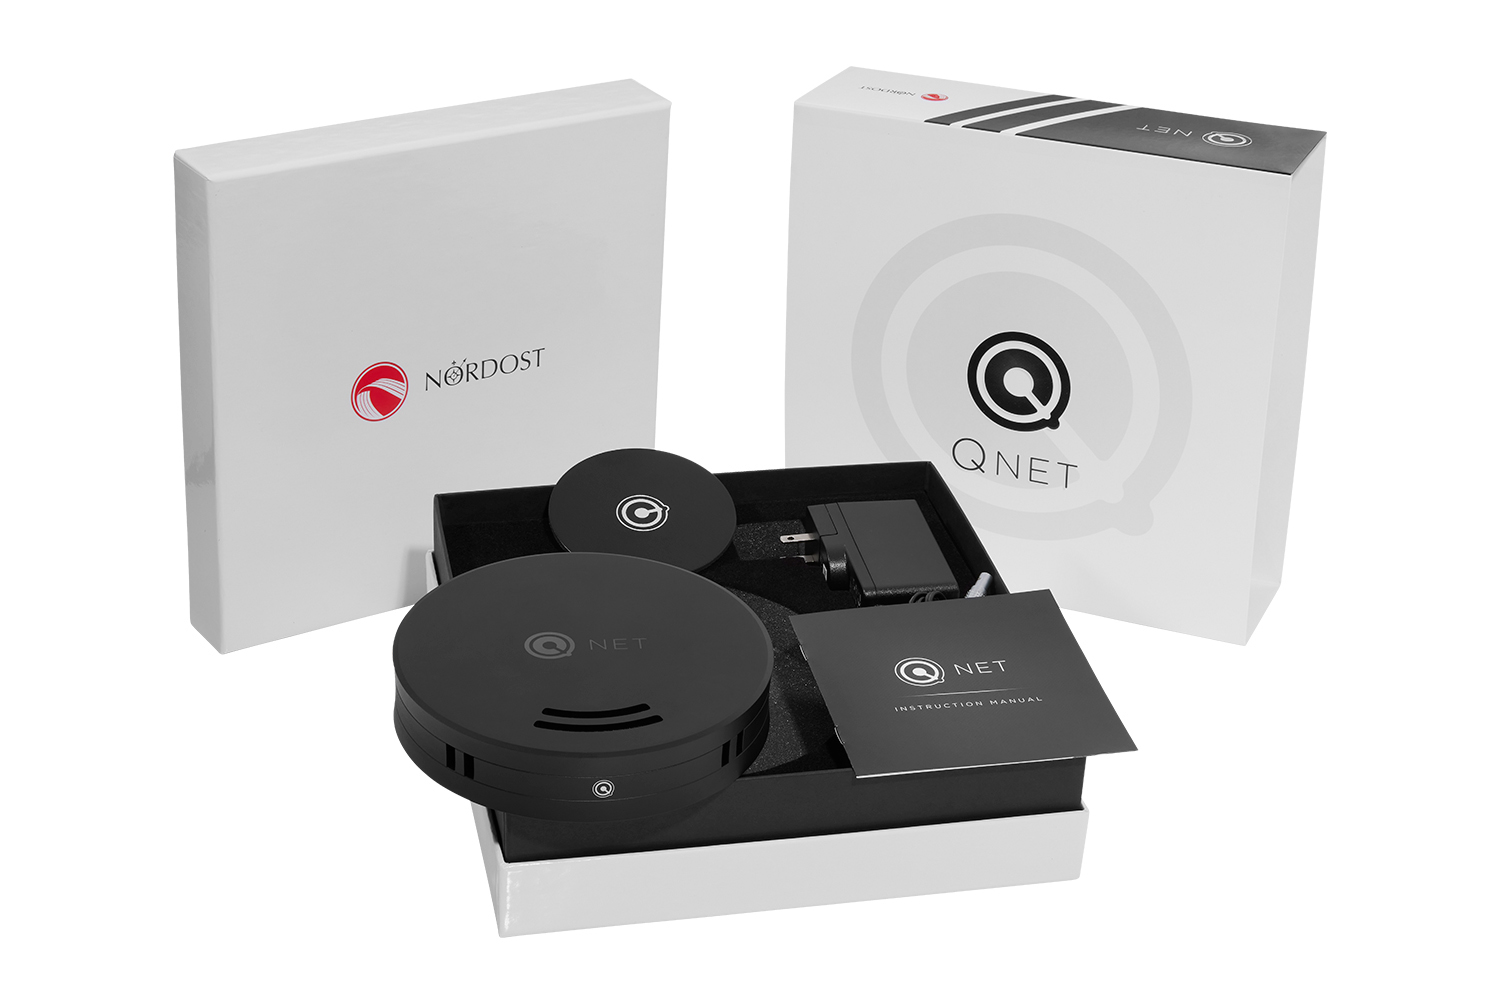 <p align="center">QNET Packaging Contents </p>